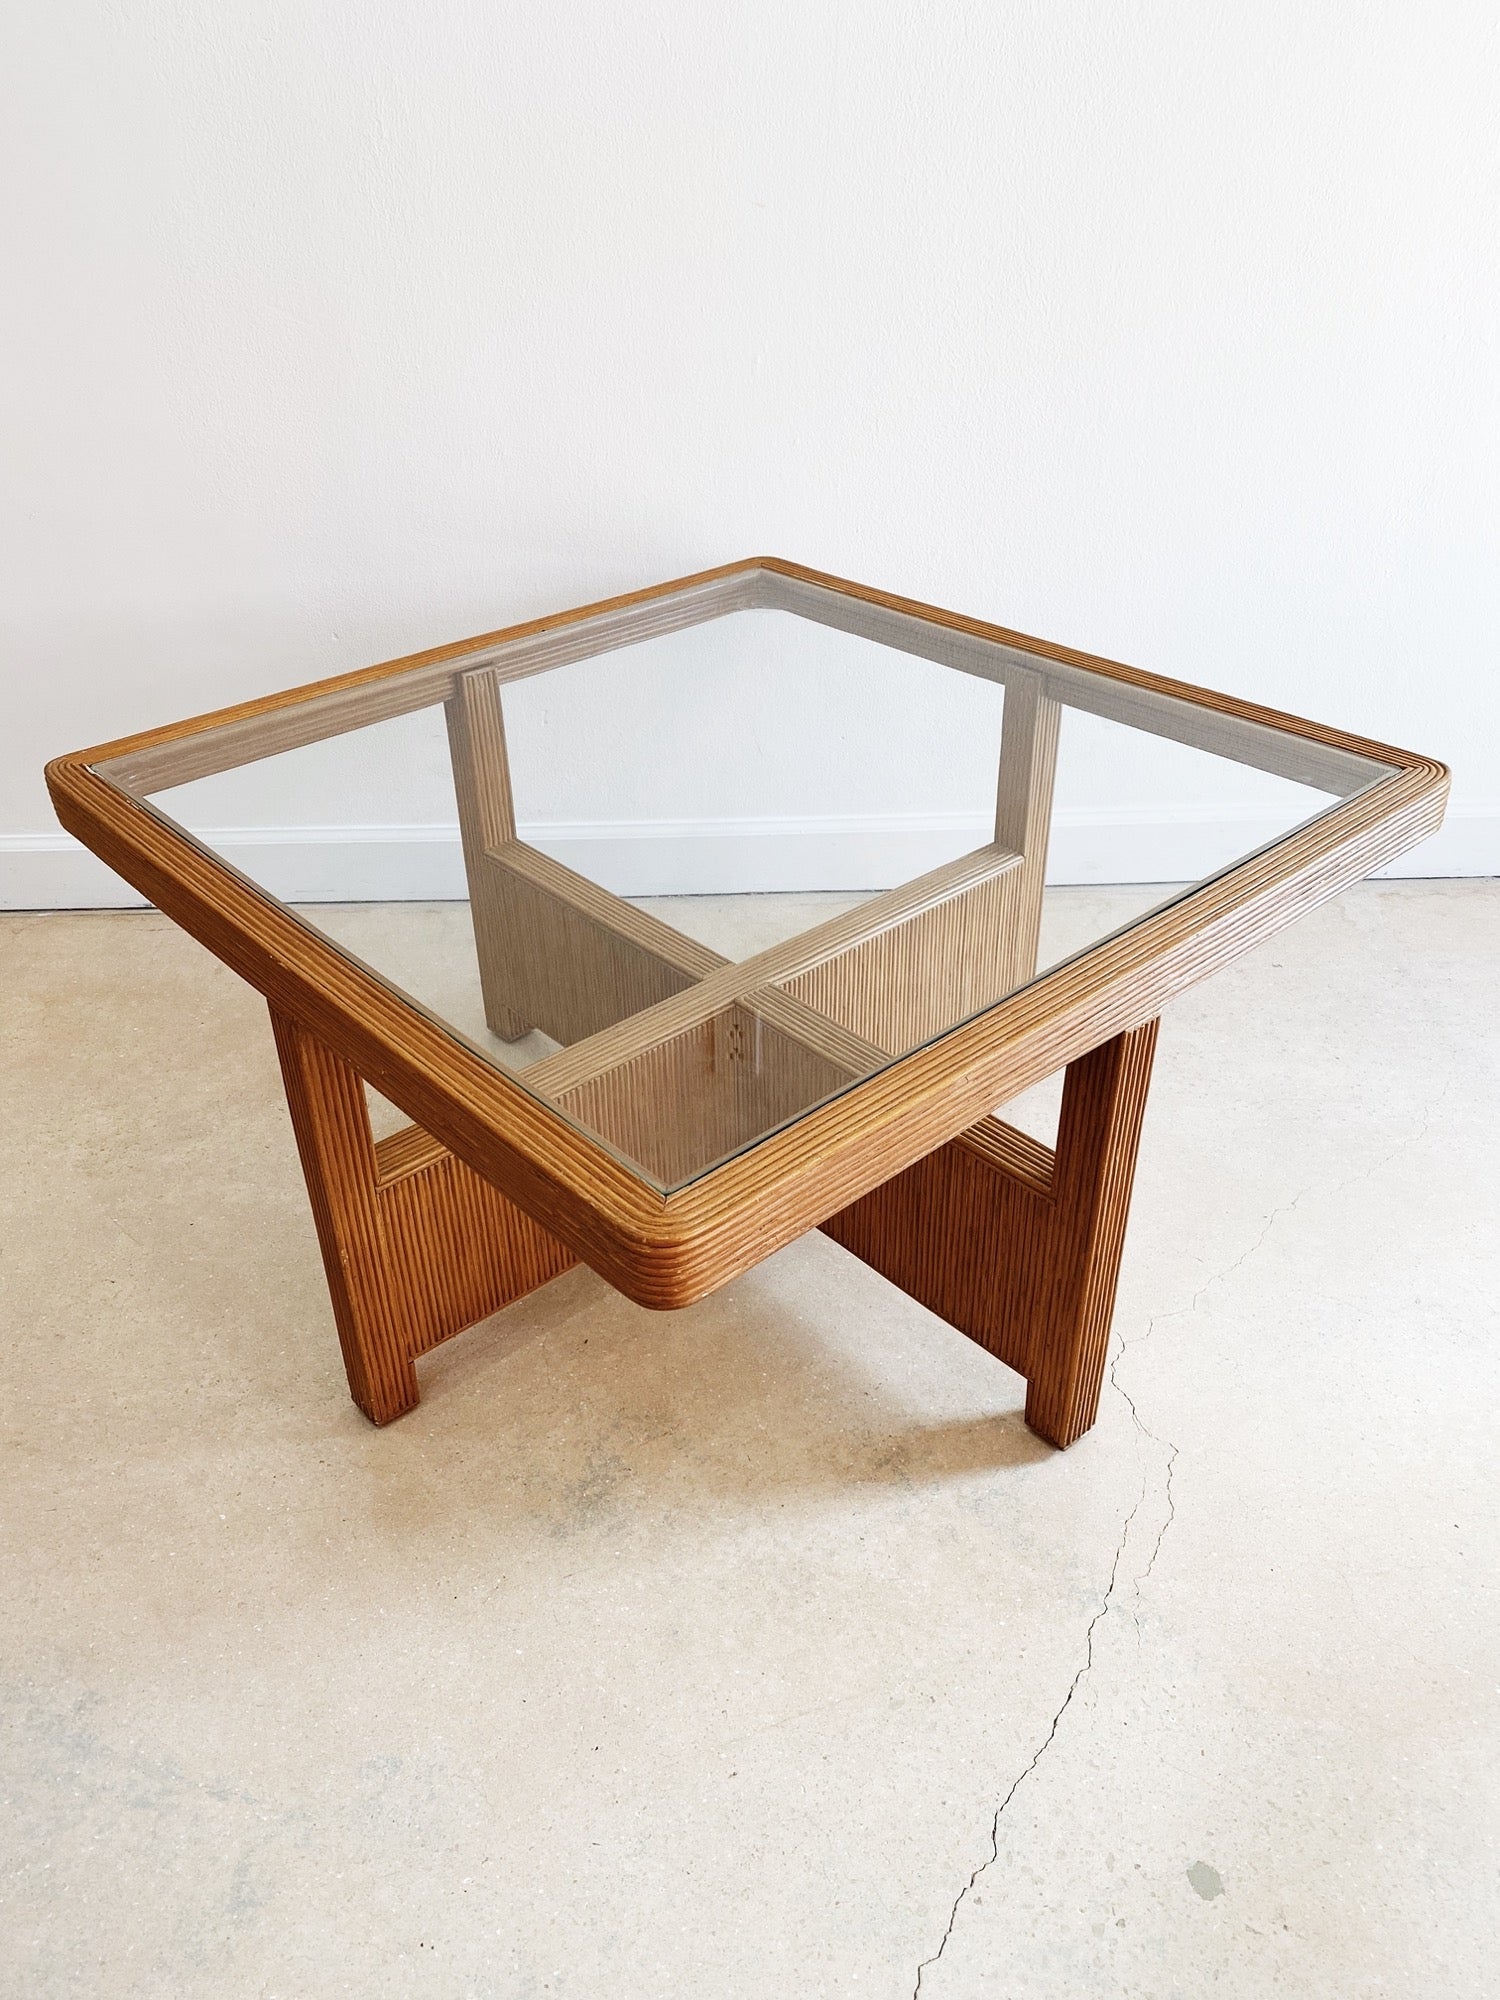 Pencil Reed Coffee Table - Rehaus